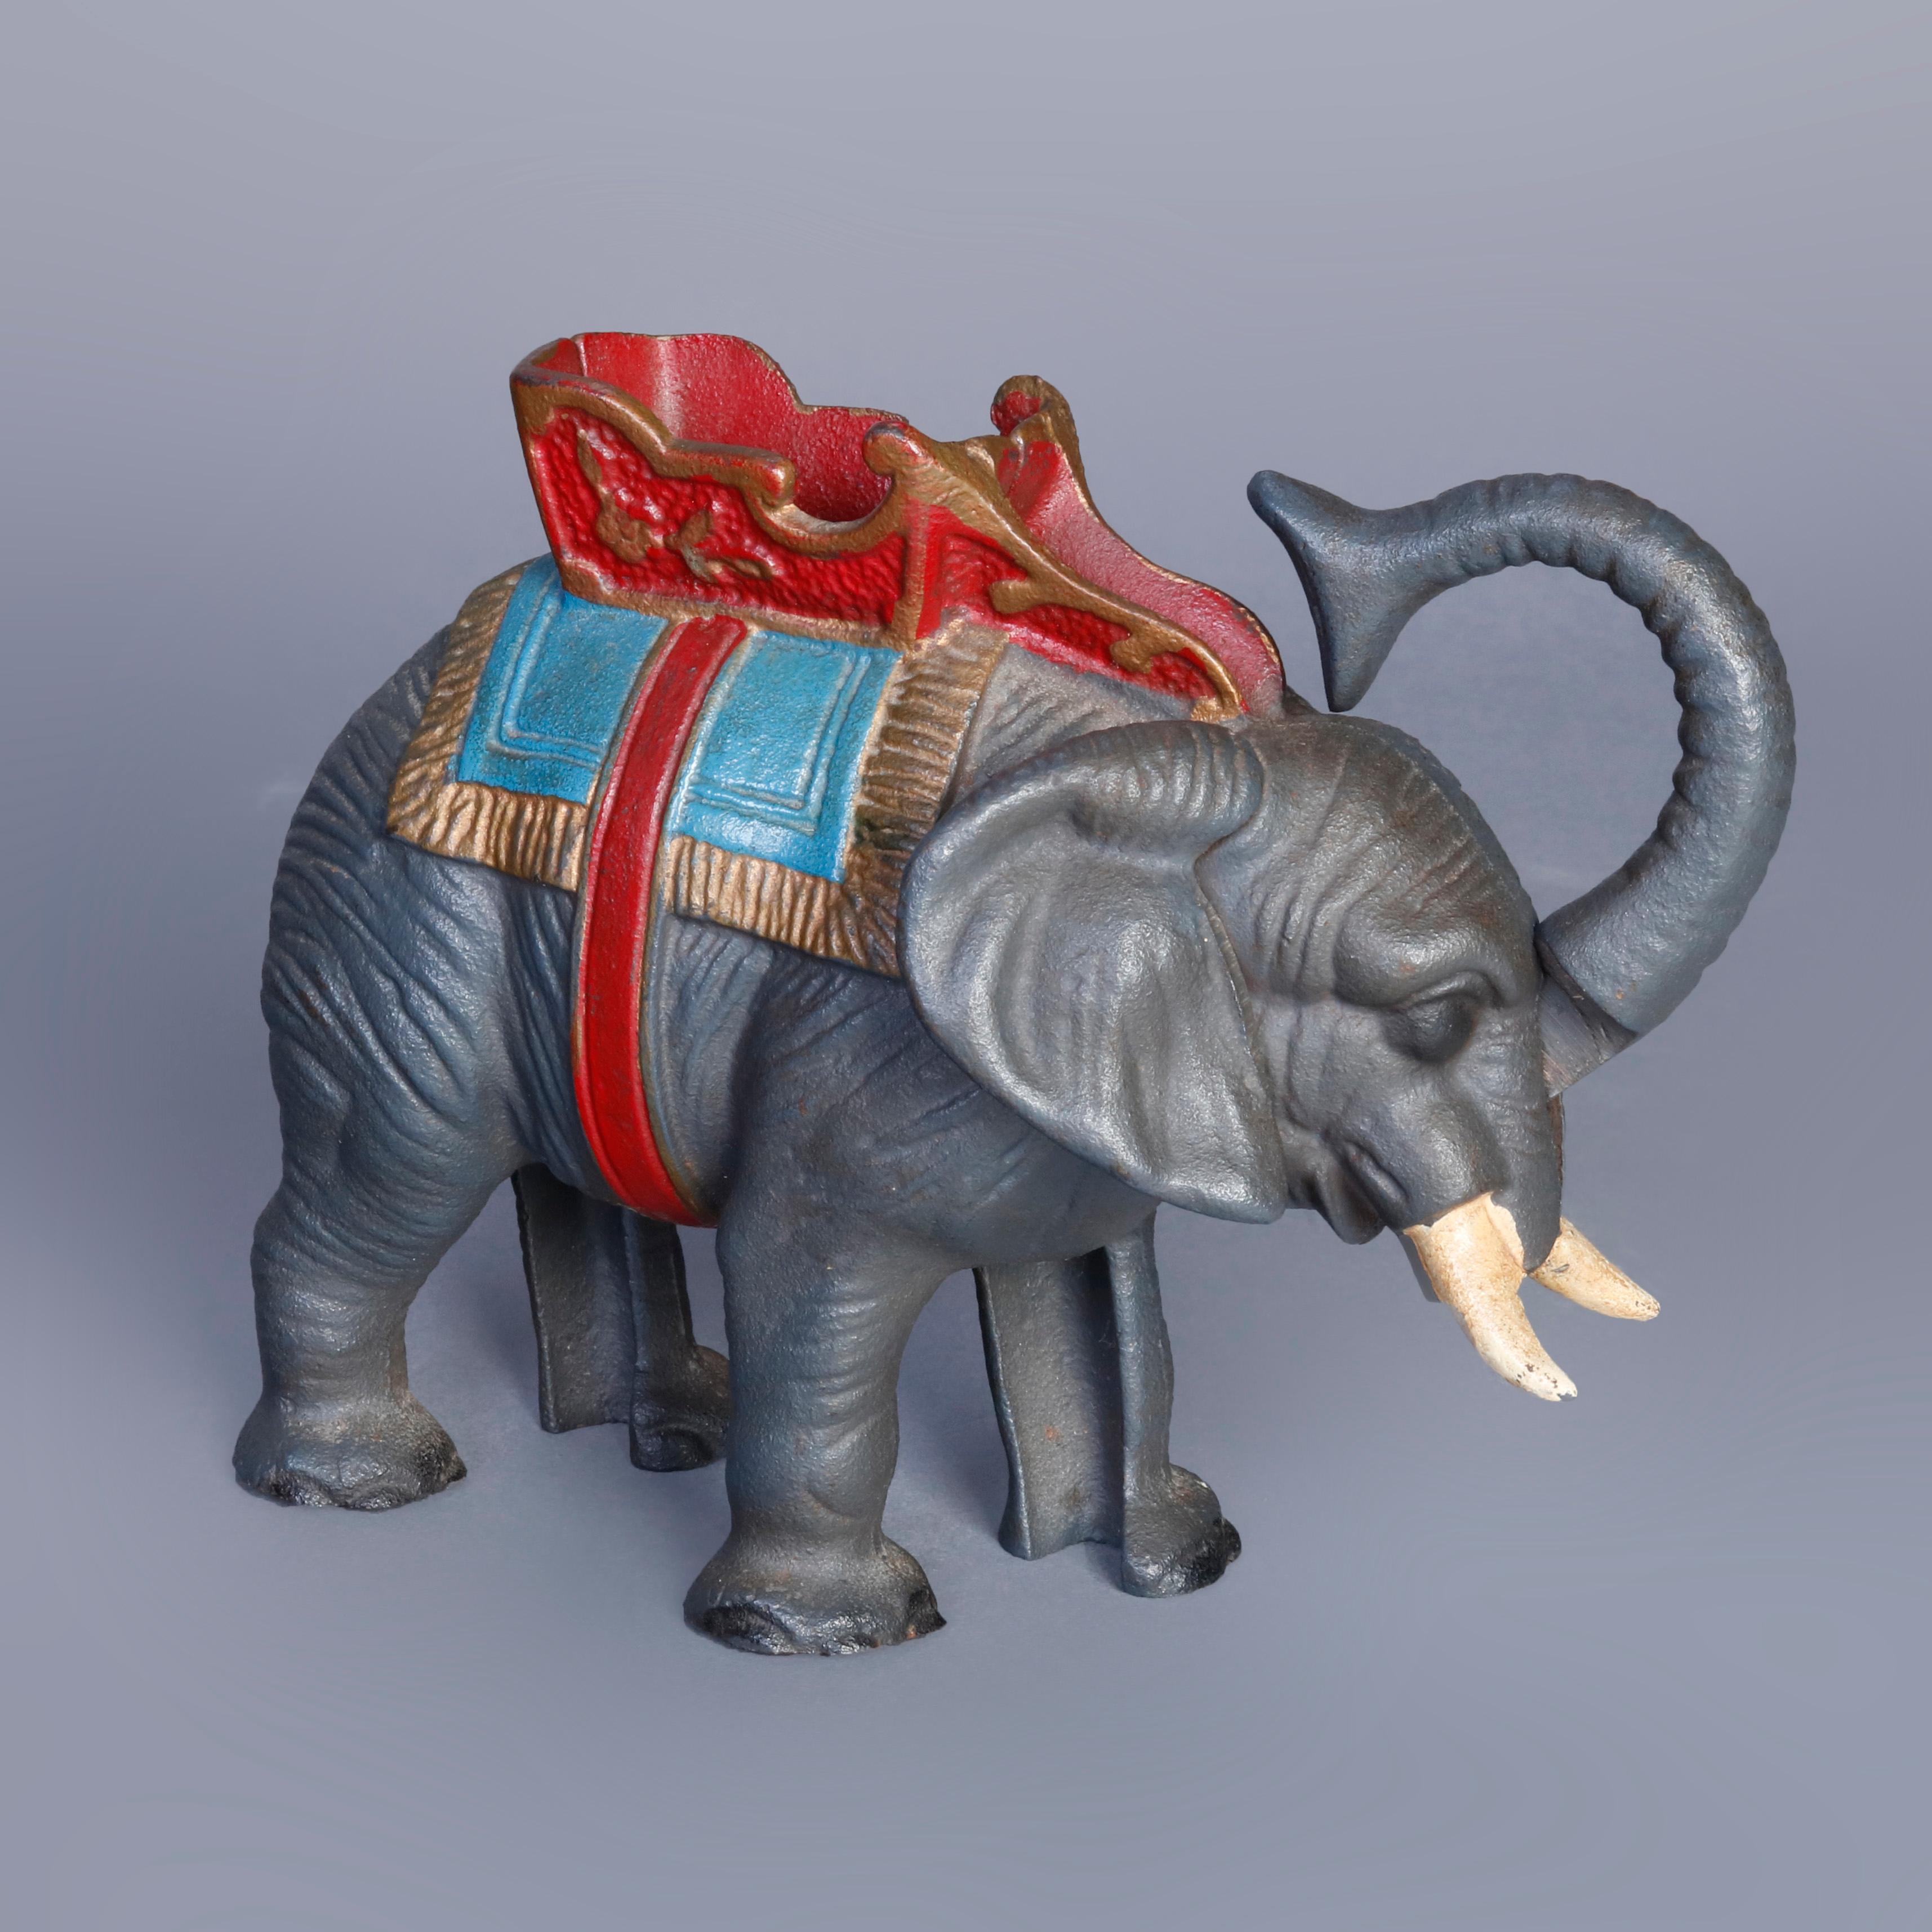 A Hubley School polychrome painted figural cast iron mechanical bank depicts a circus elephant with near mint paint and deposits coin held in trunk through opening in saddle, late 19th century or early 20th century. 

***DELIVERY NOTICE – Due to